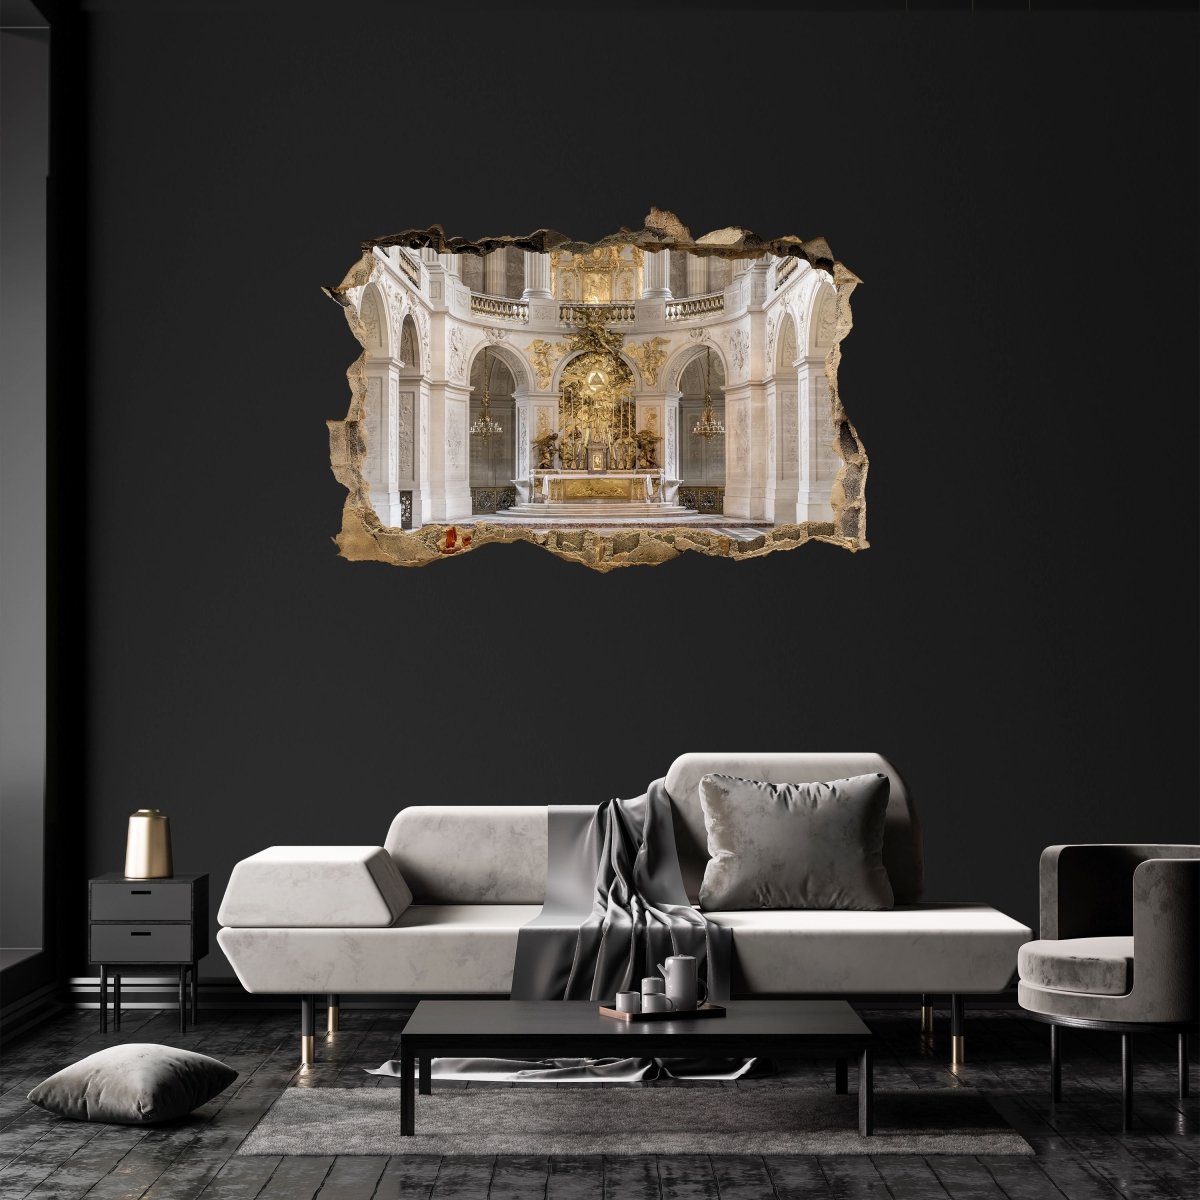 3D wall sticker magnificent gold jewelry in church - wall decal M1097